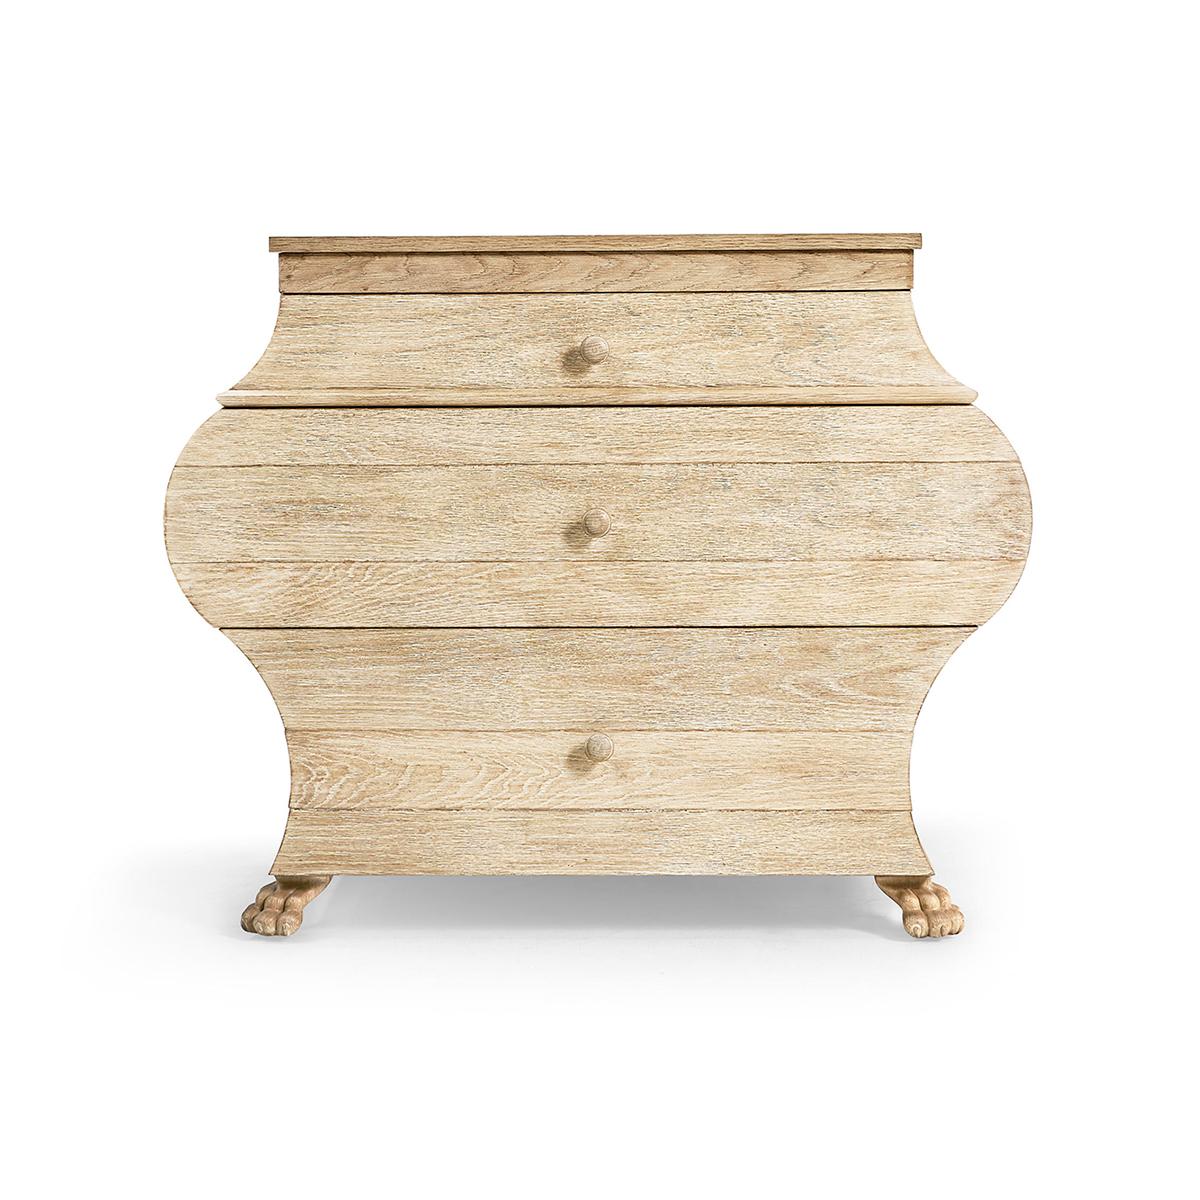 Crafted from premium acacia wood, this chest exudes a soothing whitewashed tone that enhances the intricate natural patterns of the wood grain. The chest offers not just visual splendor but also practical utility, making it a quintessential piece